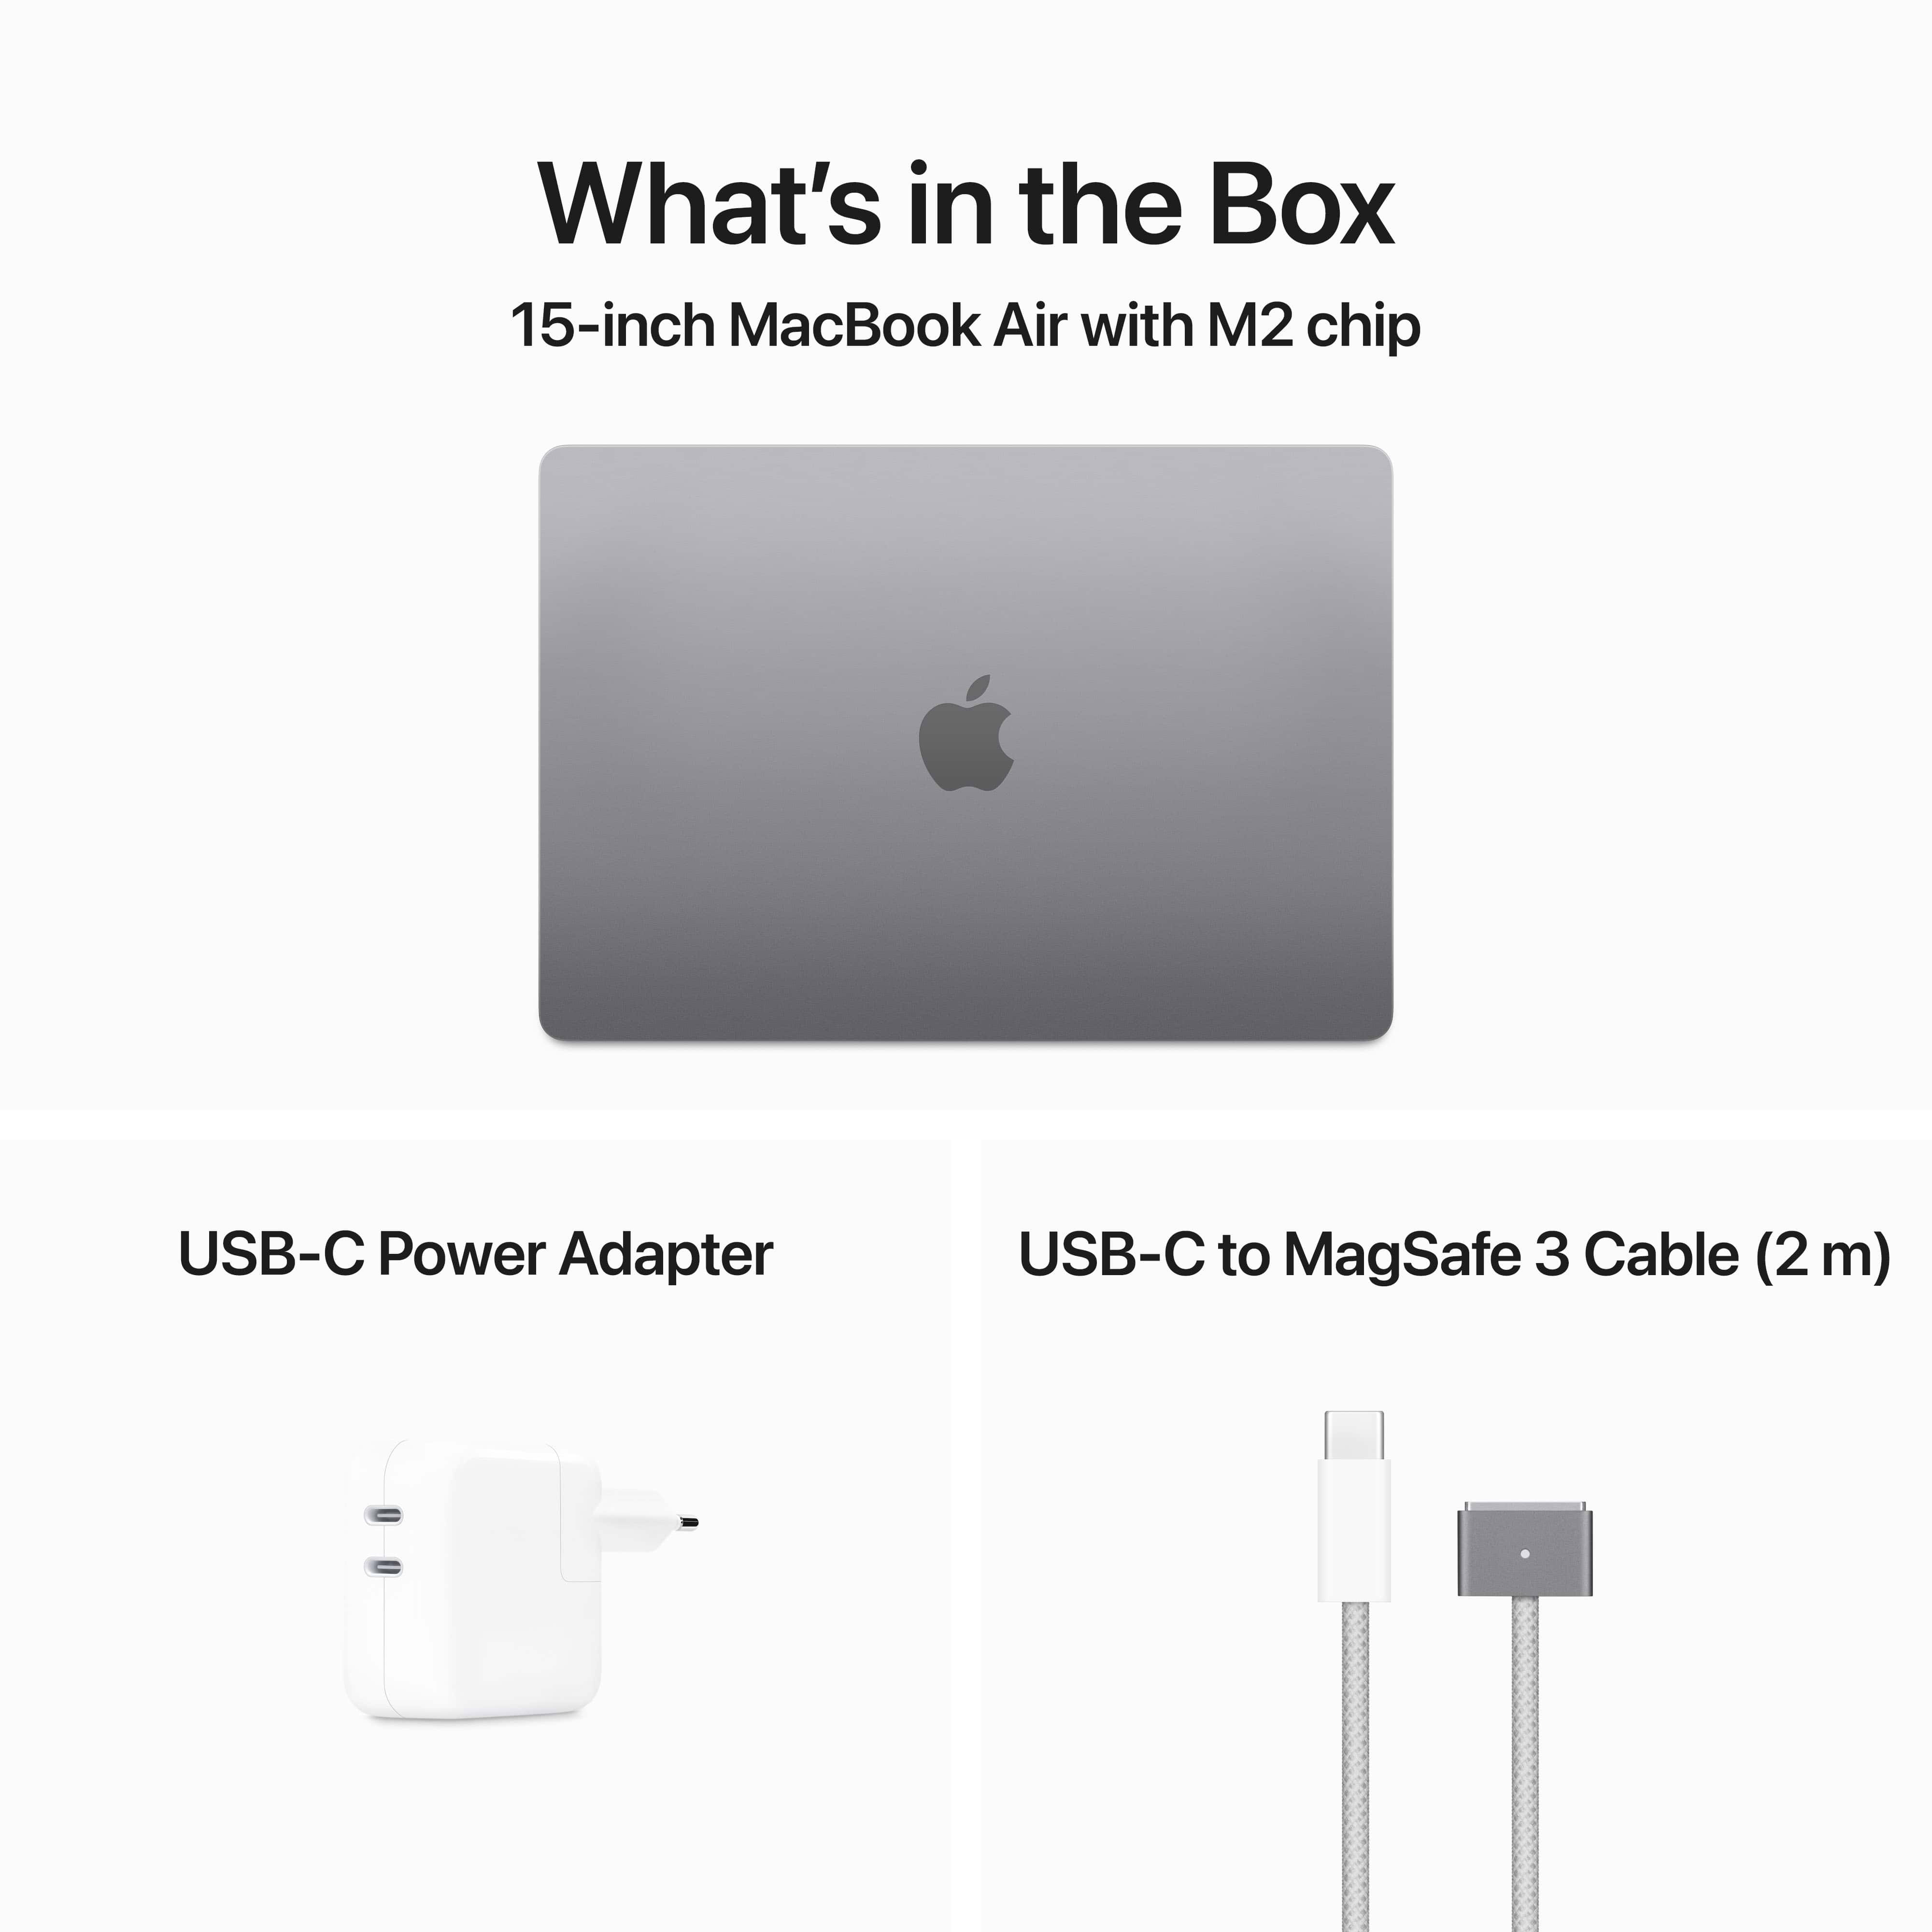 '15-inch MacBook Air: Apple M2 chip with 8-core CPU and 10-core GPU 512GB - Space Grey  מחשב אייקון  נייד'